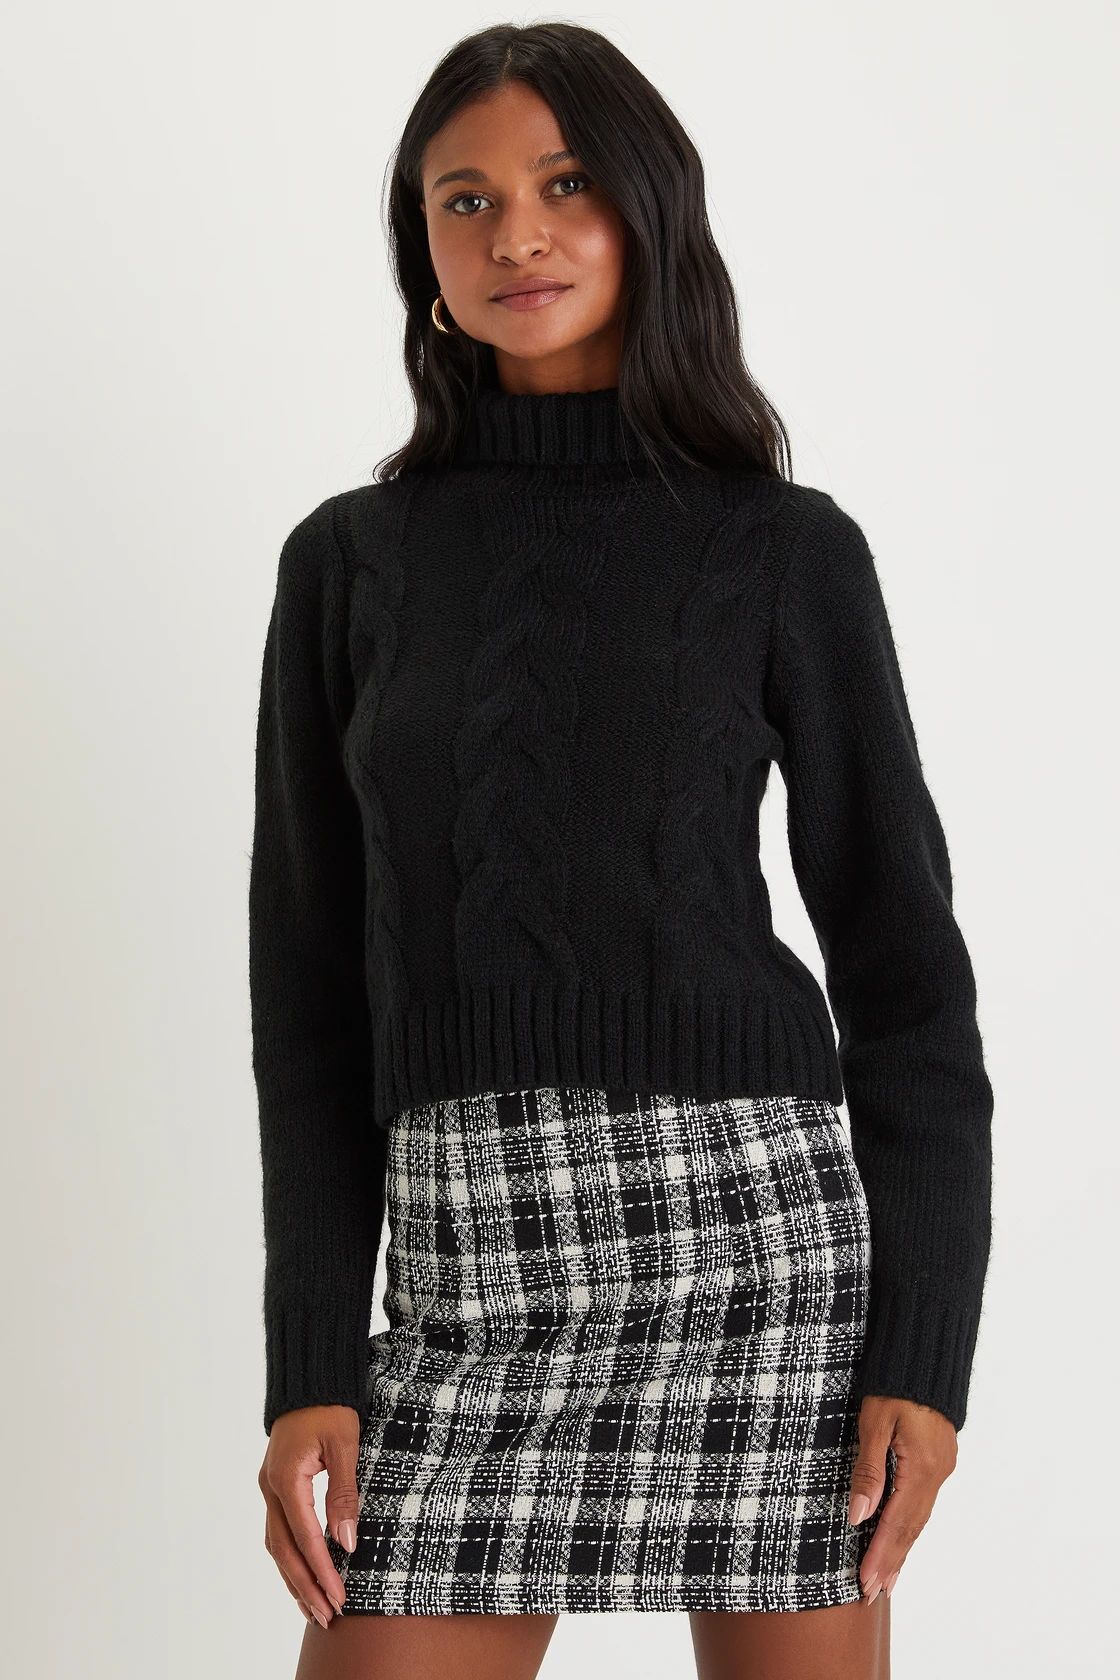 Snuggly Touch Black Cable Knit Turtleneck Sweater | Lulus